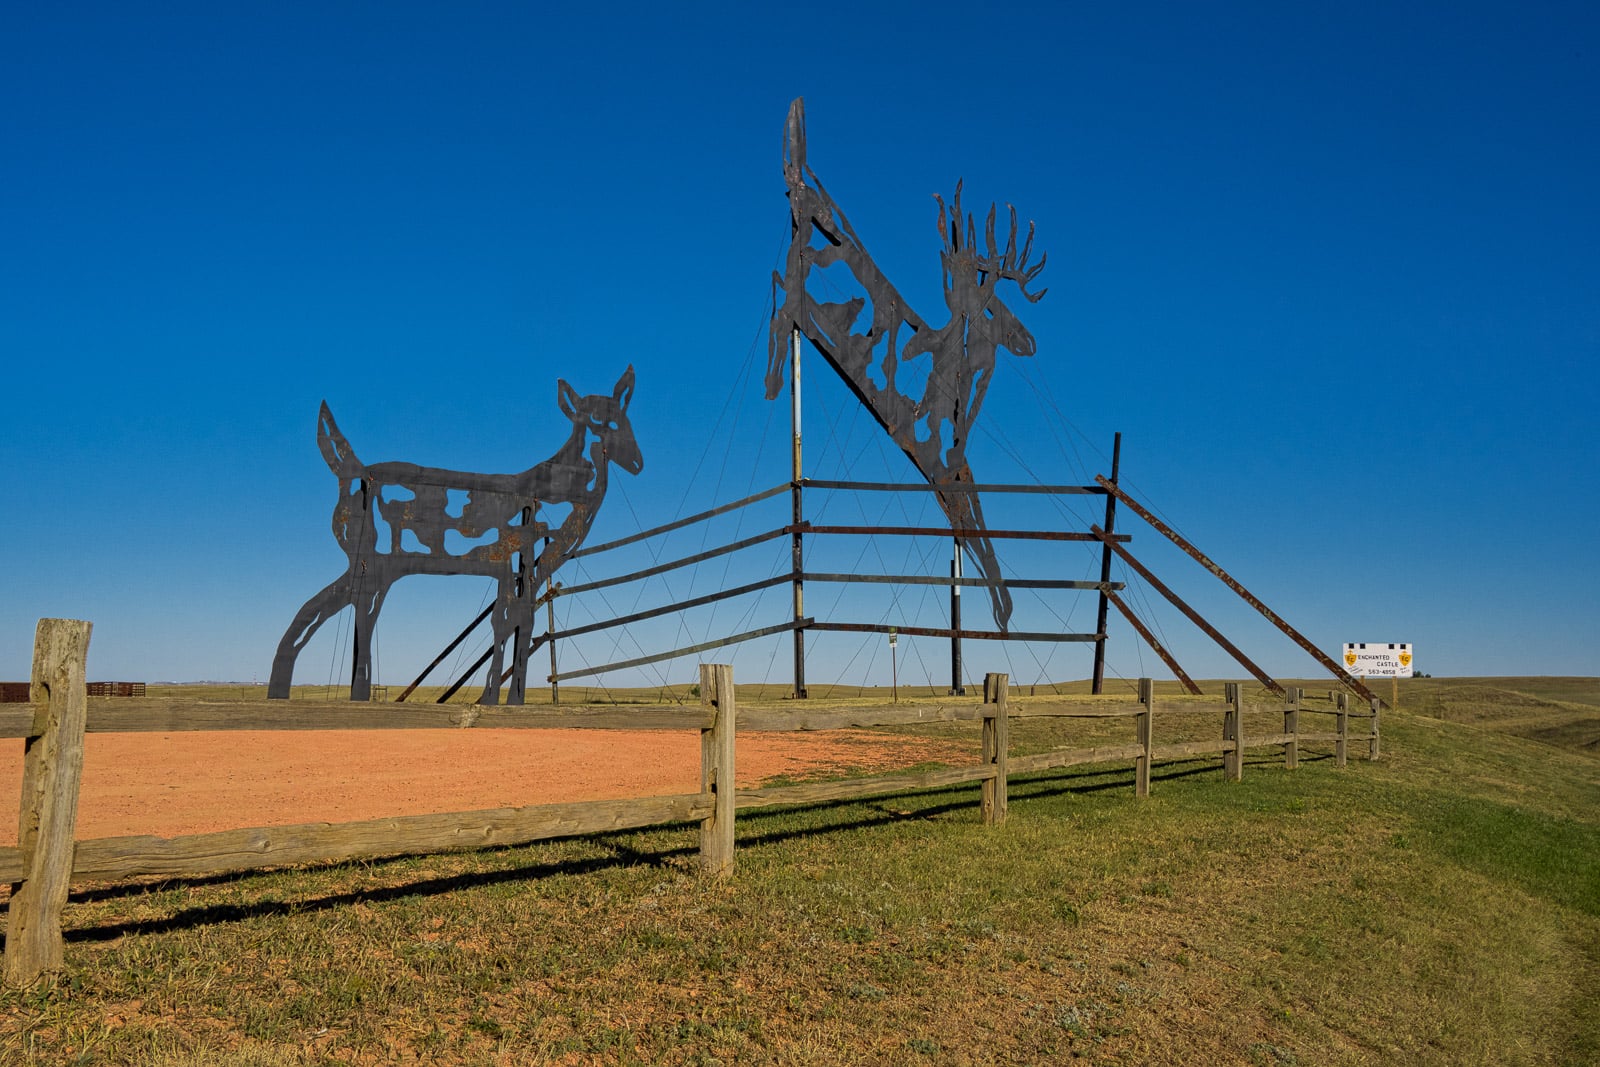 This sculpture by Gary Greff, called Deer Crossing, is located along the Enchanted Highway, between I-94 and Regent, North Dakota.